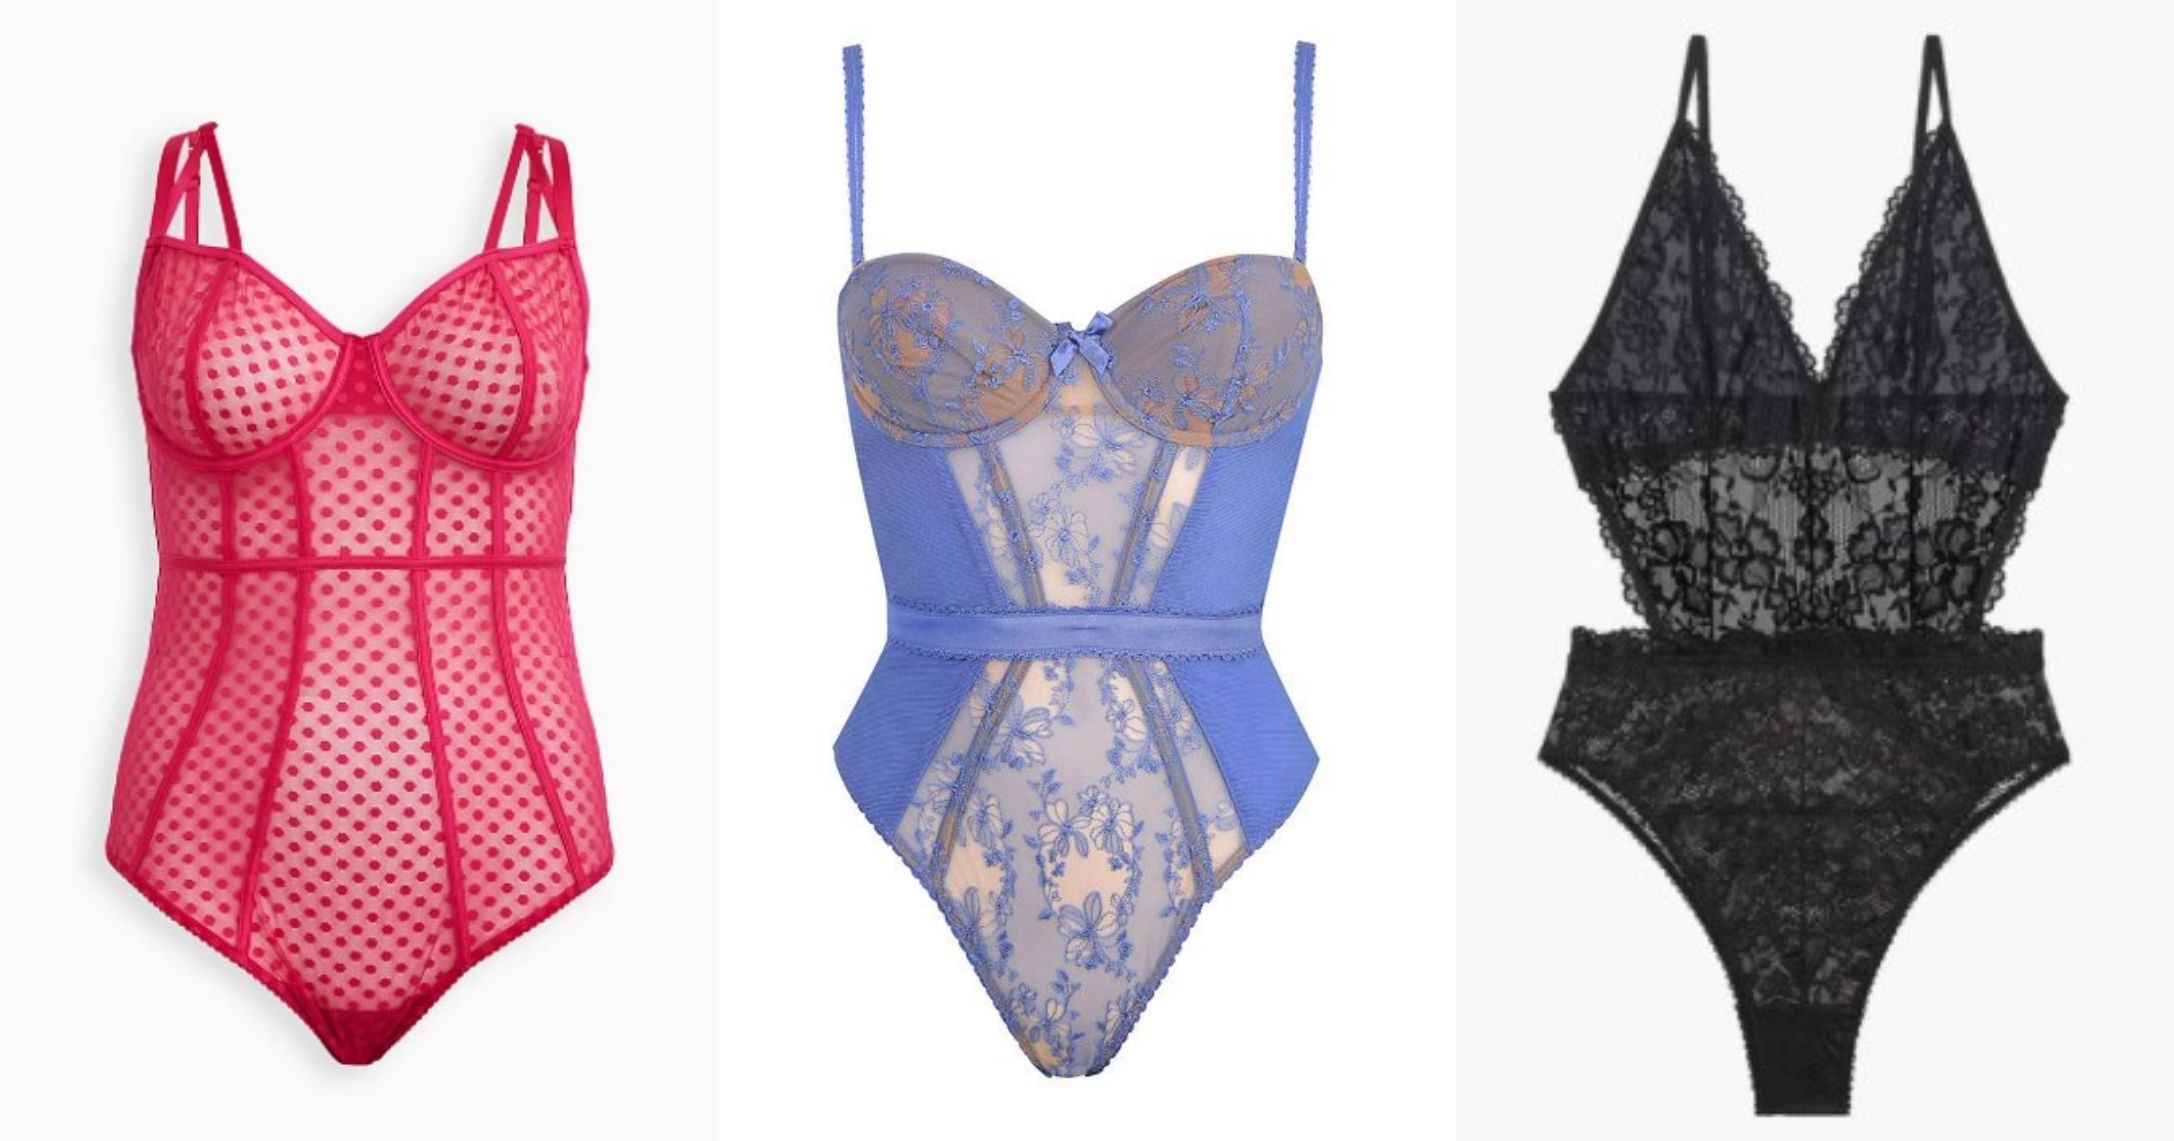 Current Obsession: A Lingerie Company that Actually Makes Sexy